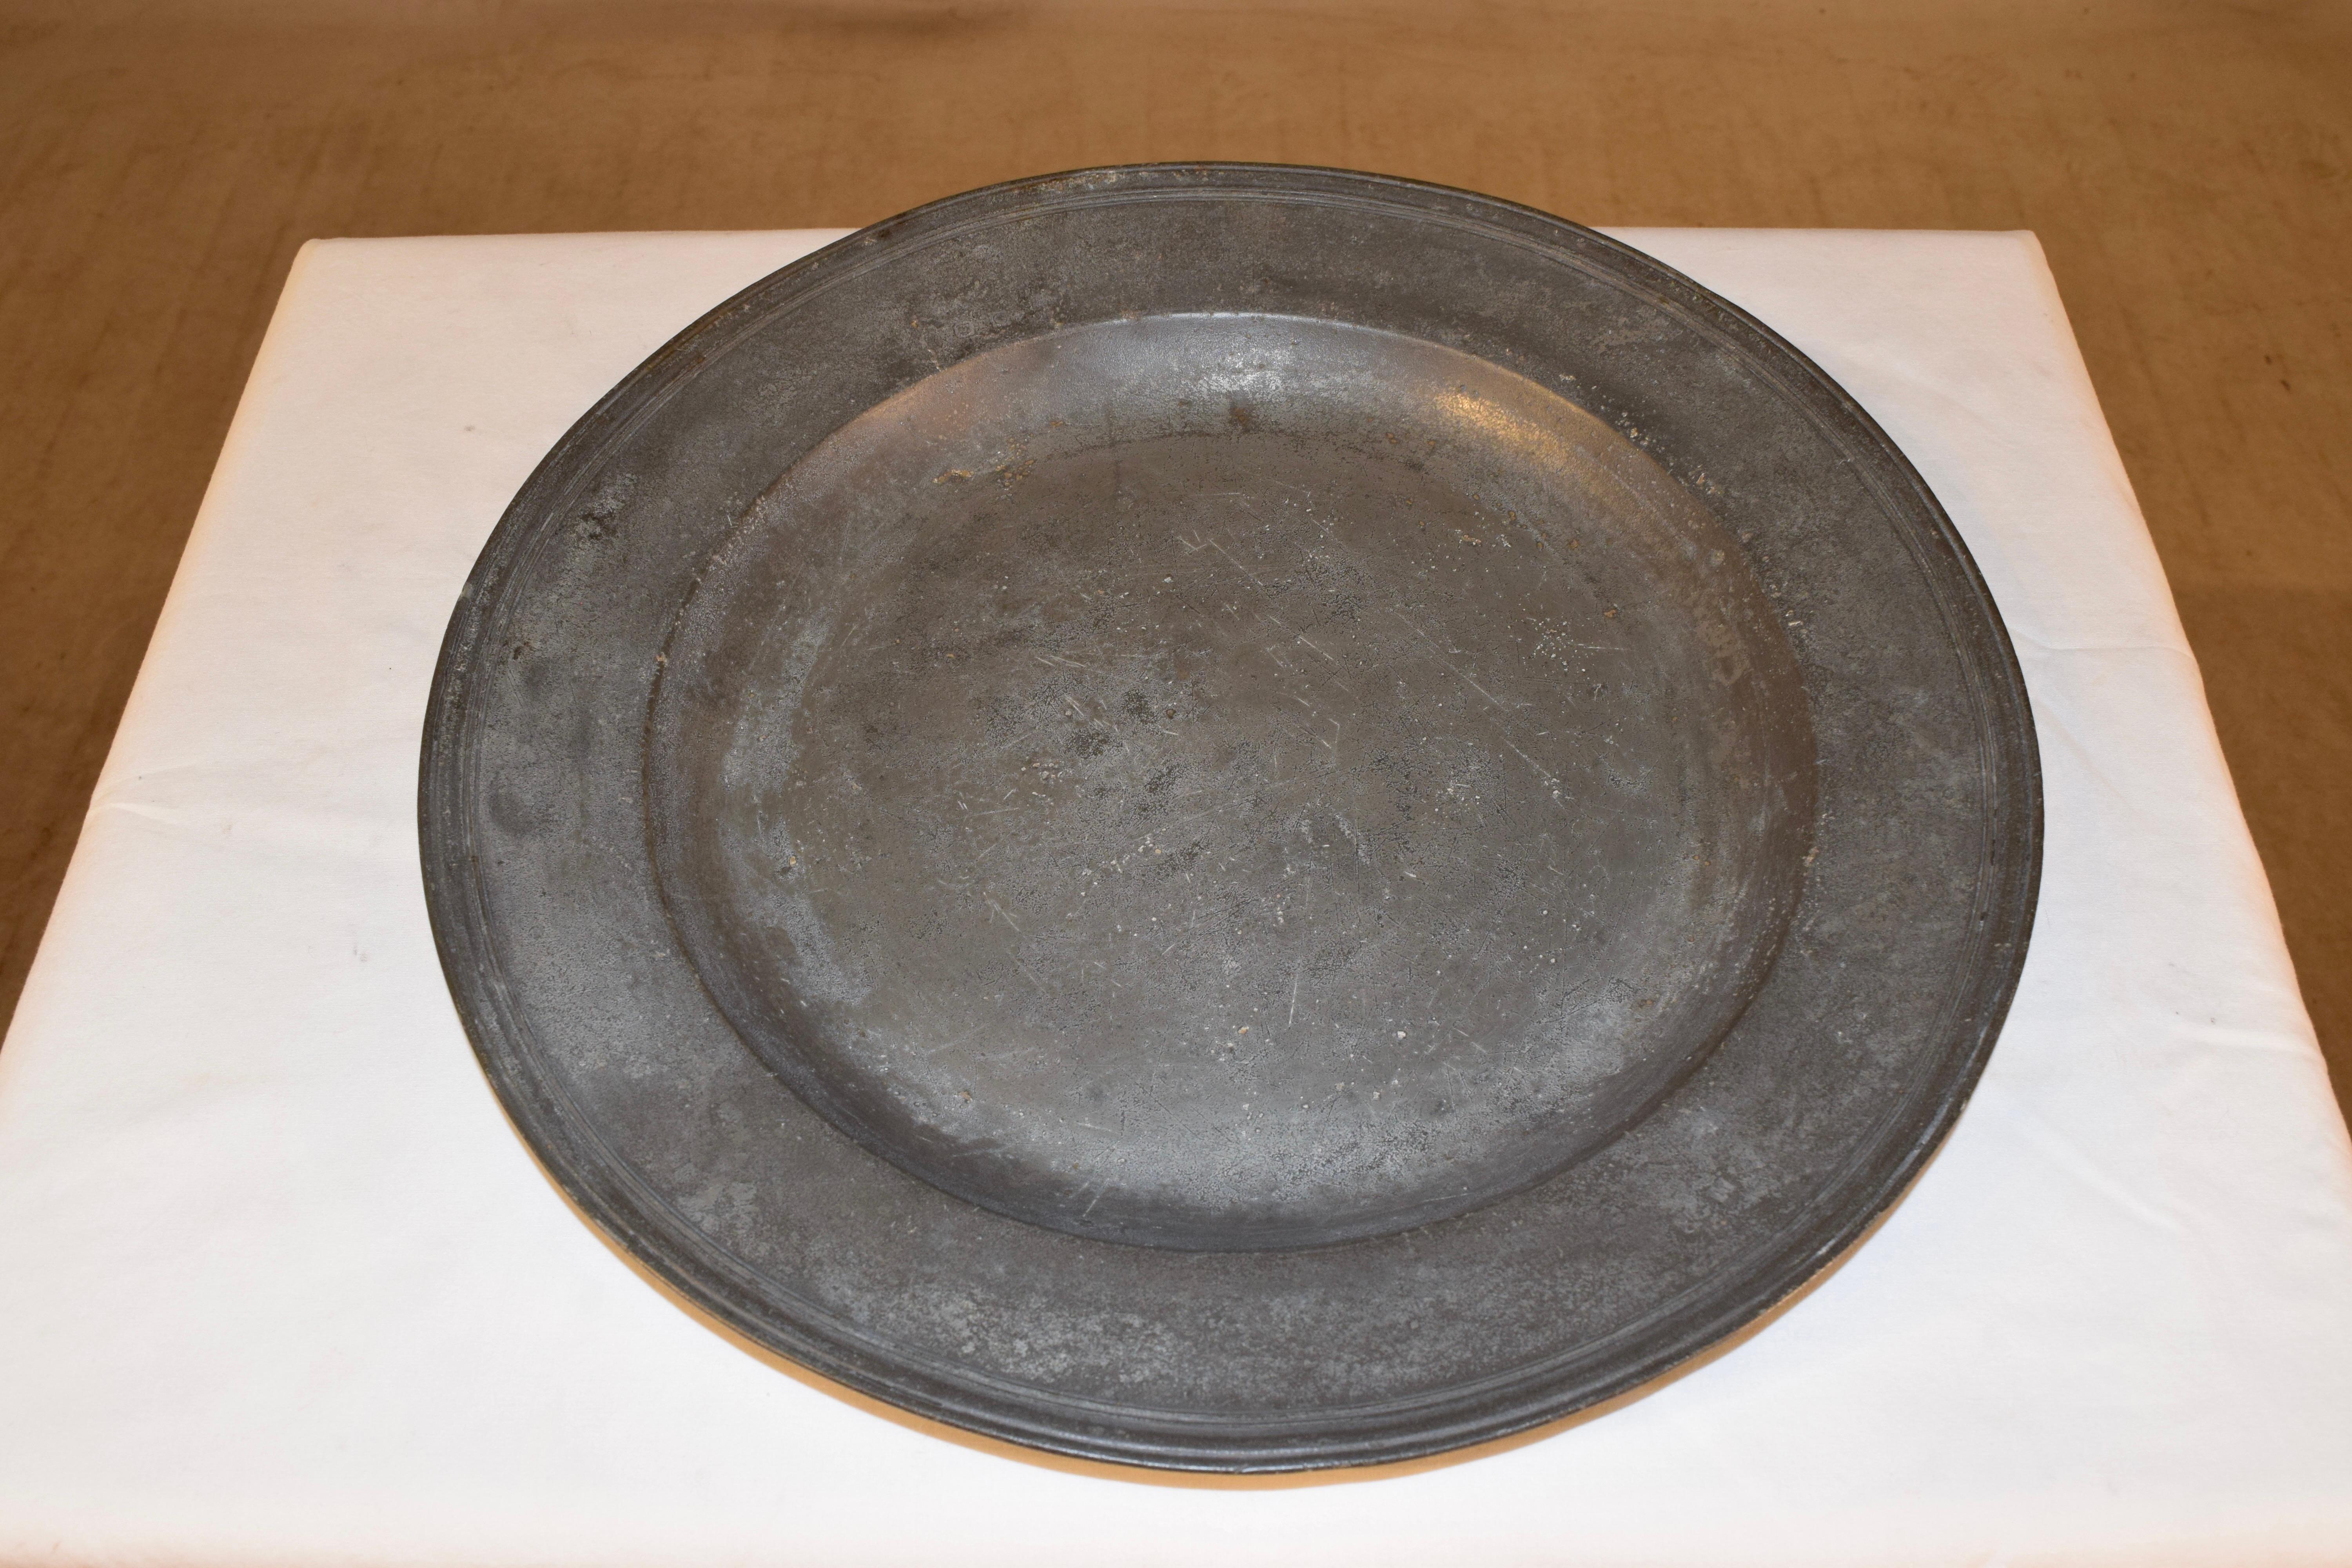 18th century pewter charger from England with London marks on the back of the rim, which is pictured. Gorgeous patina.